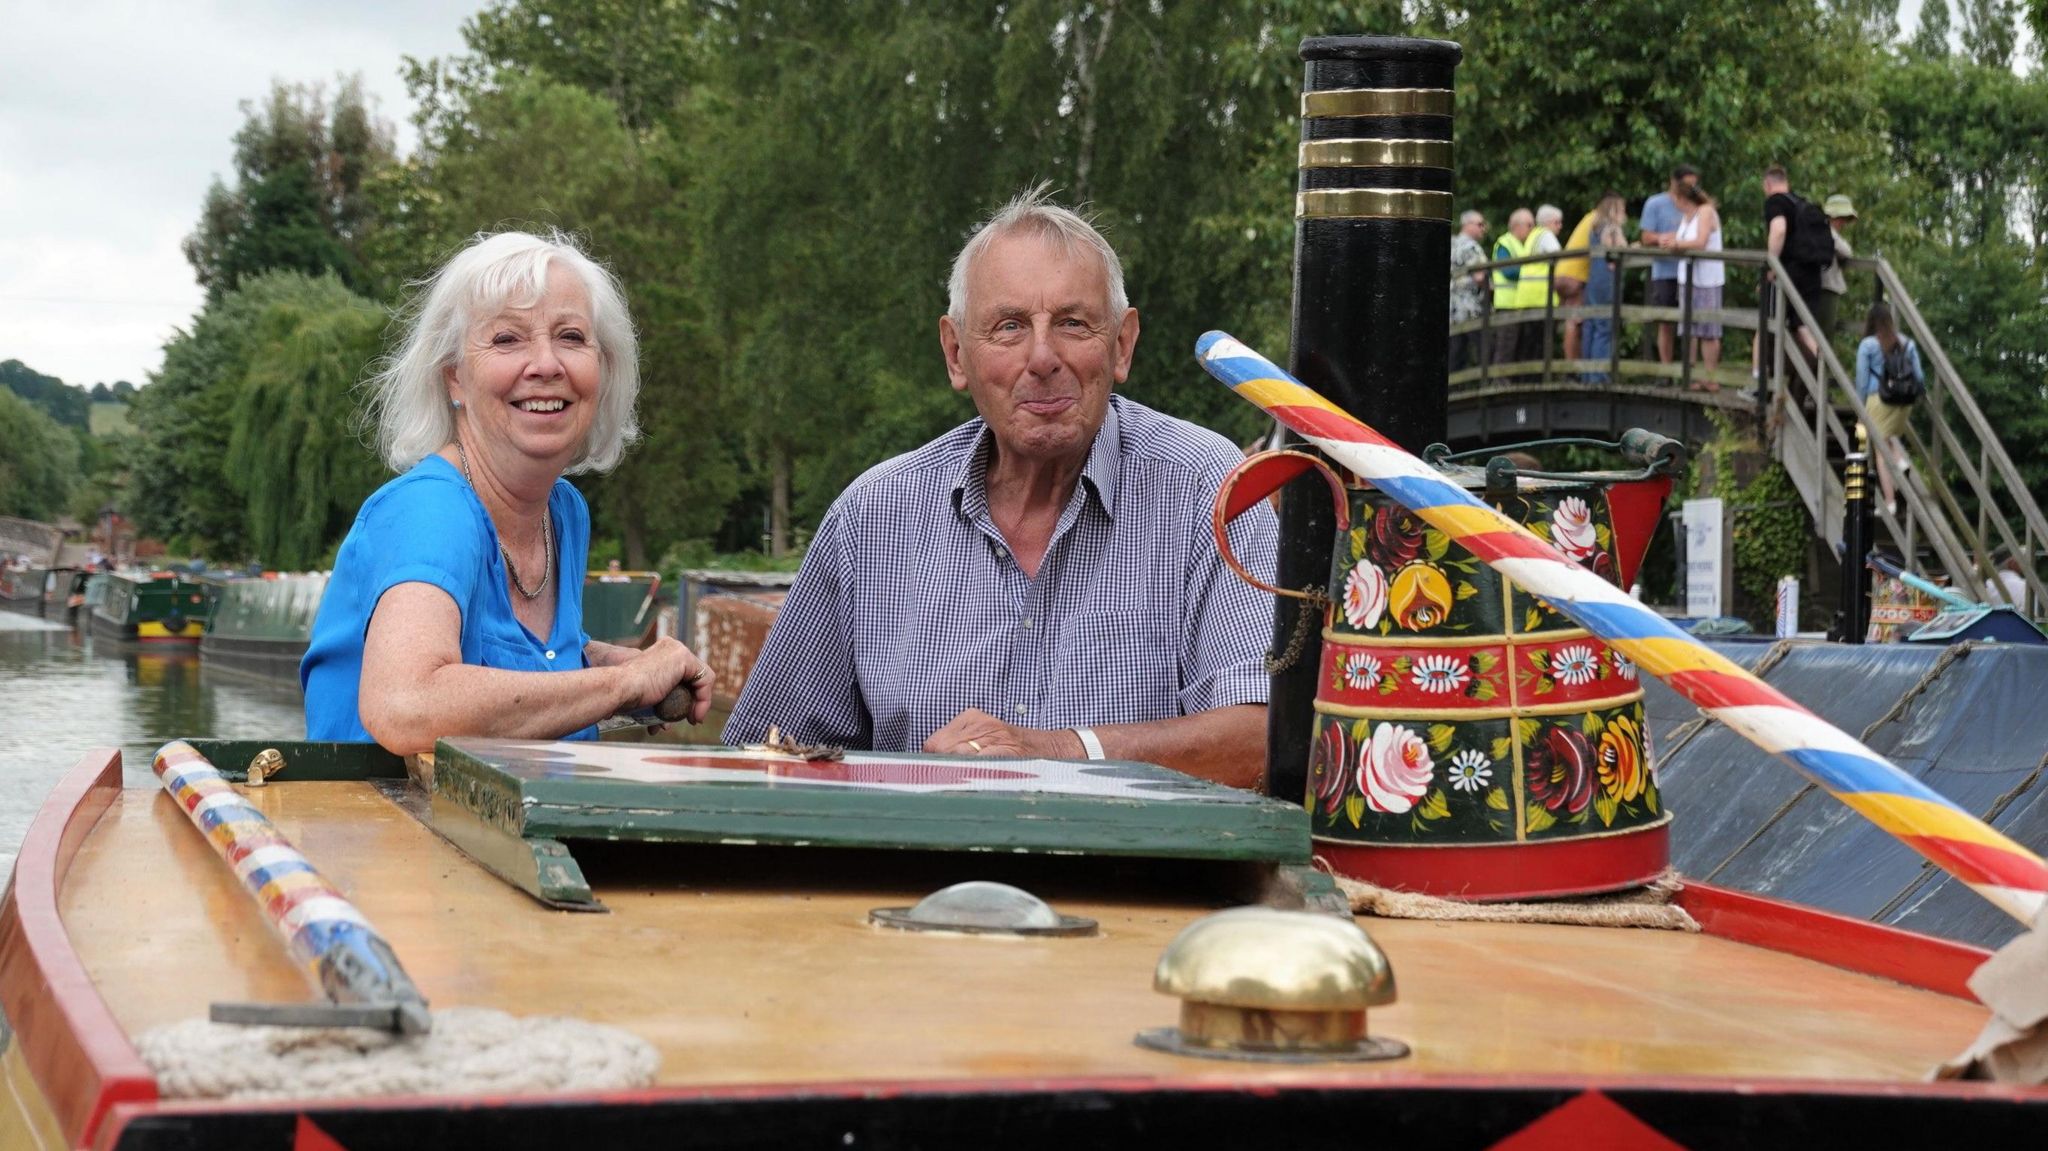 Lady Sheila with light-coloured hair aboard a narrowboat with the owner